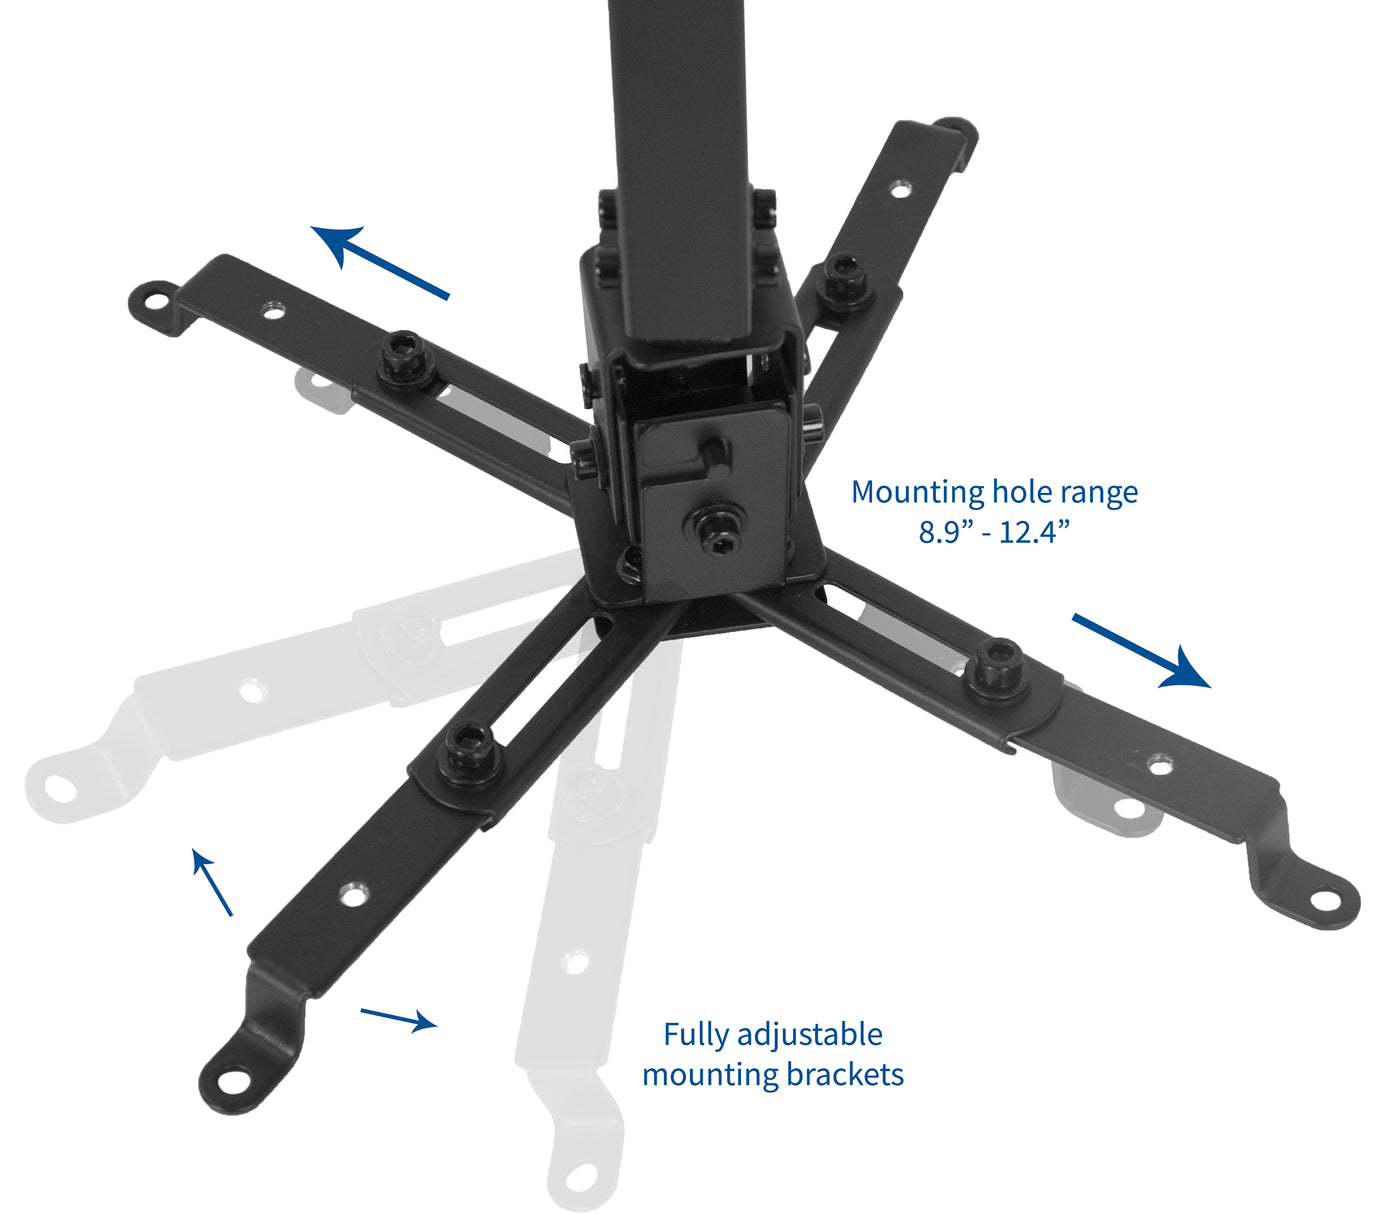 Mounting hole brackets are adjustable to fit your projector.